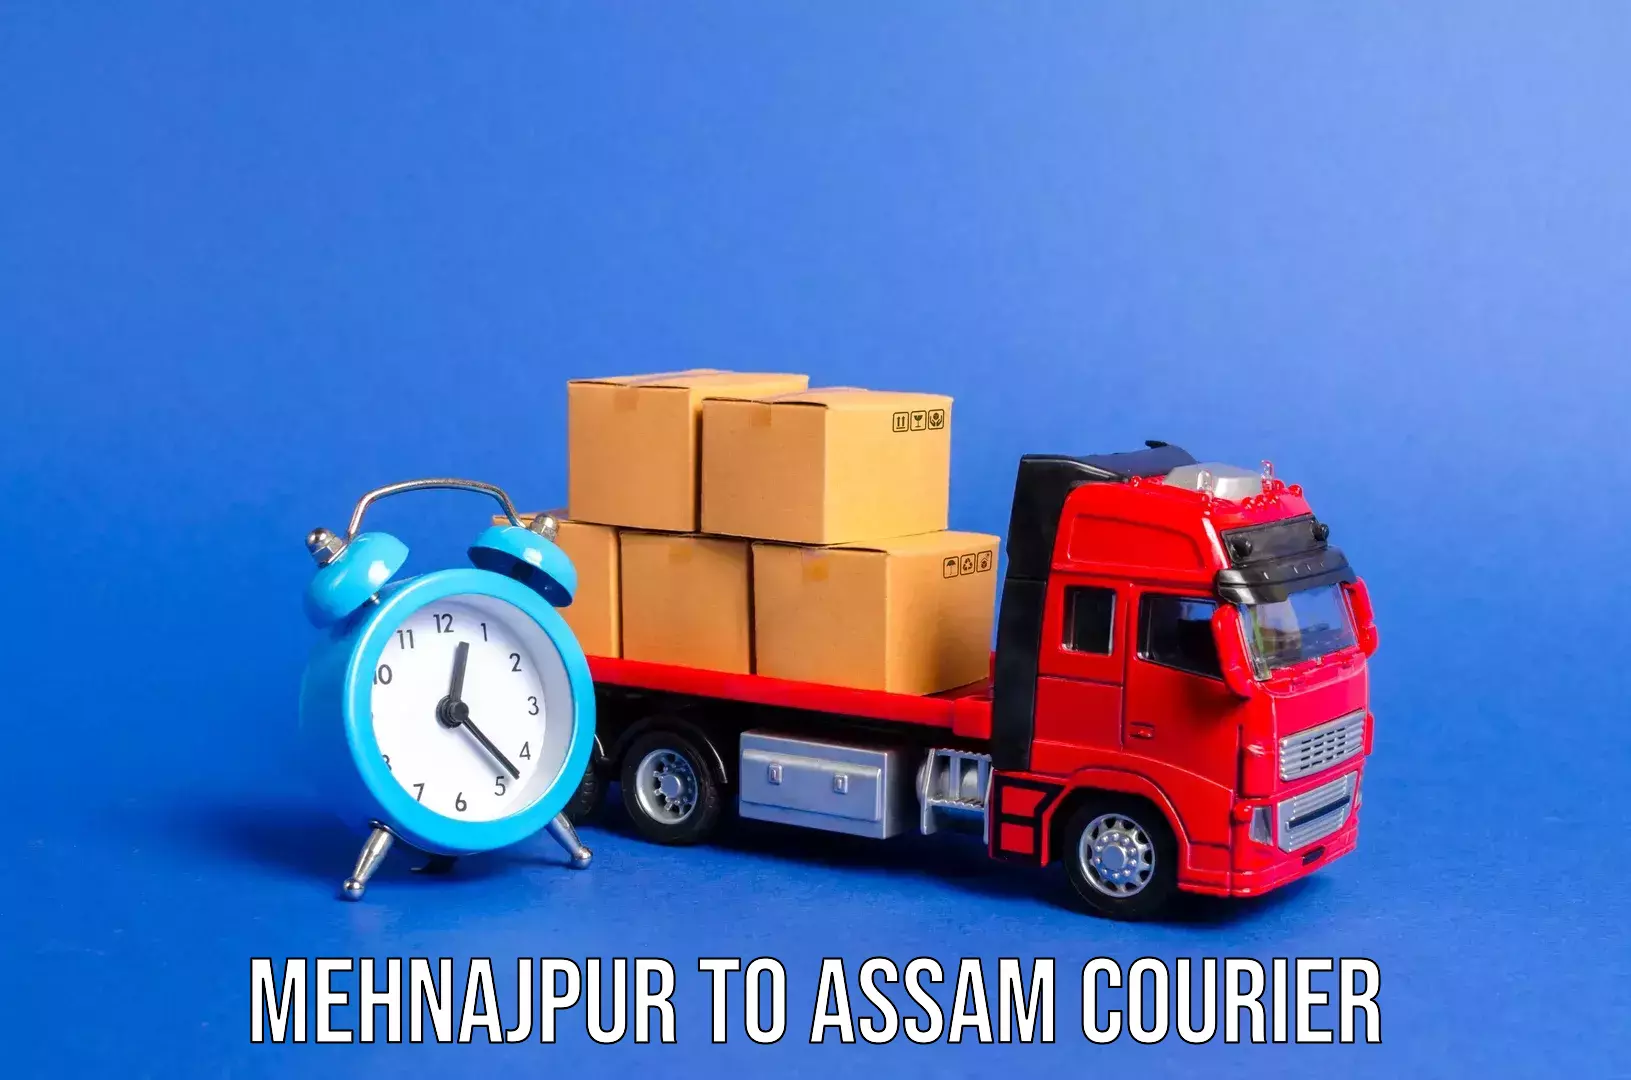 Luggage transport consultancy Mehnajpur to Mayang